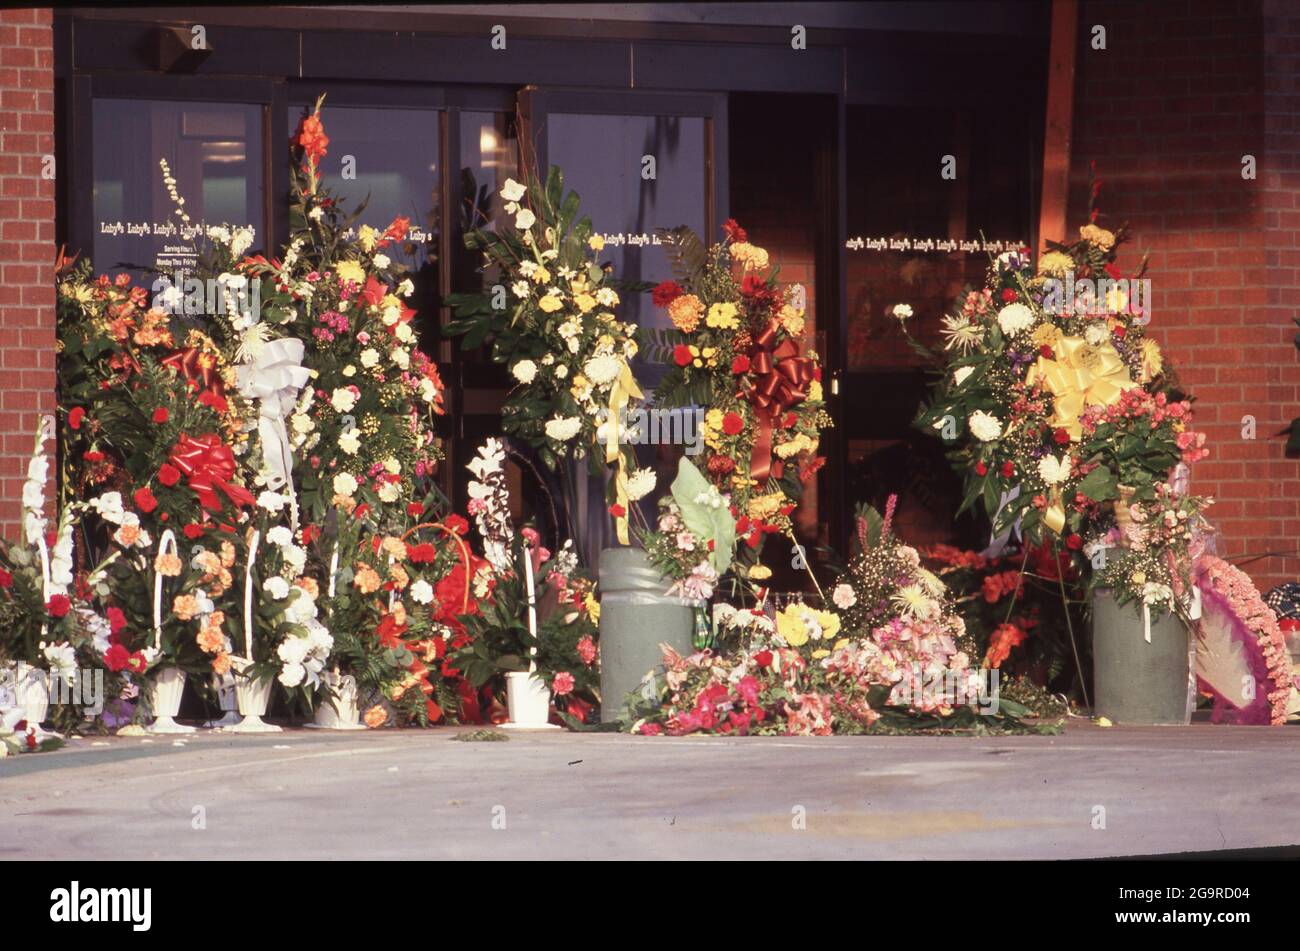 Killeen Texas USA, October 1991: Community members leave flowers in memory of the victims of a mass shooting at Luby's Cafeteria in Killeen. on October 16. George Hennard, a 35-year-old Killeen resident, crashed a pickup into the eatery and shot 23 lunch-time diners and staff to death before killing himself. ©Bob Daemmrich Stock Photo